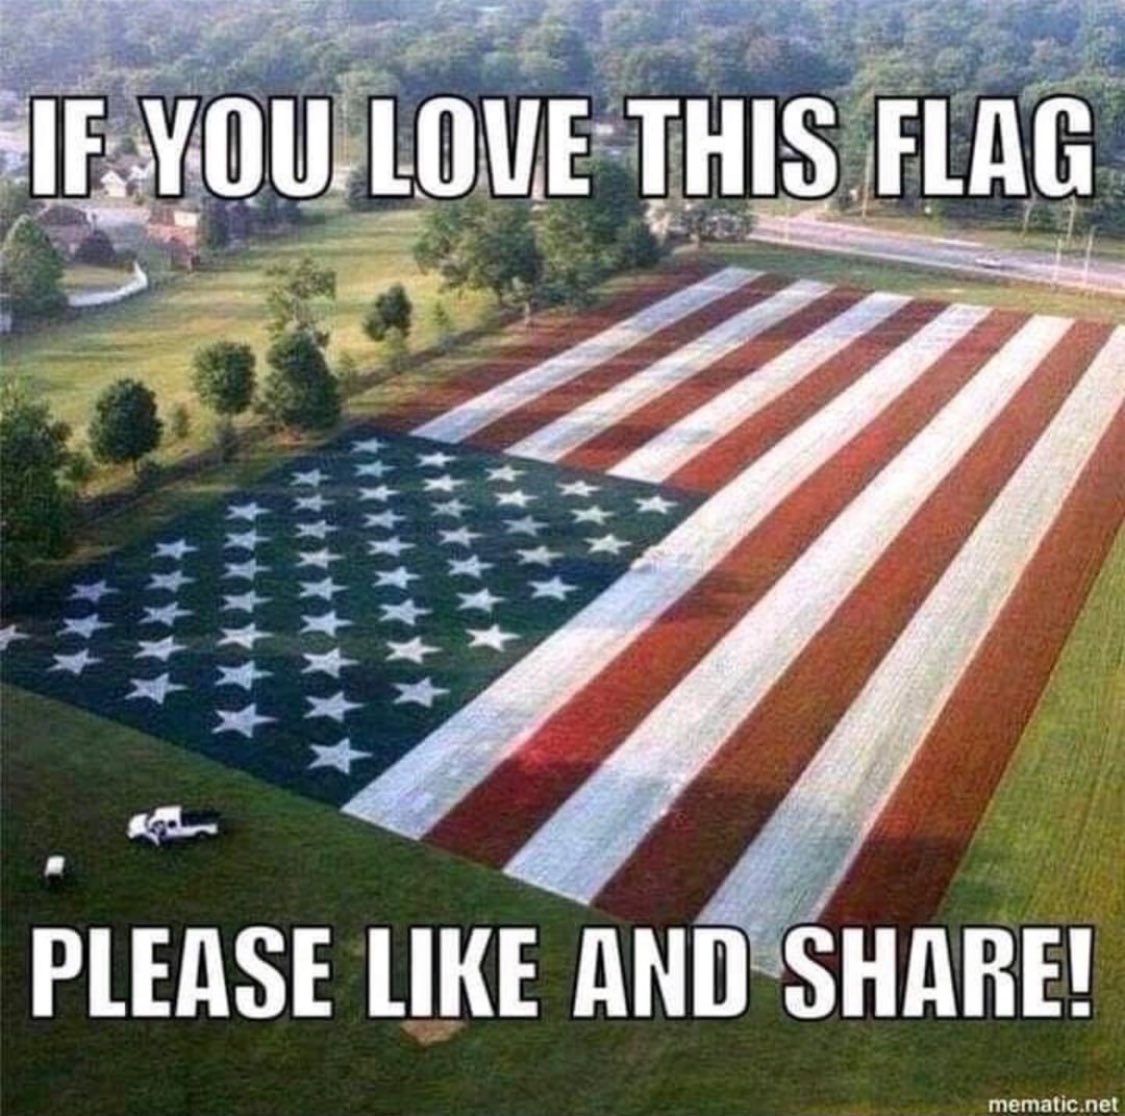 A lot of Our Brothers and Sisters lost Their Lives to Protect what this Flag Represents! One Nation Under God and Freedom. Please don’t Let Us be the Generation to Lose it!